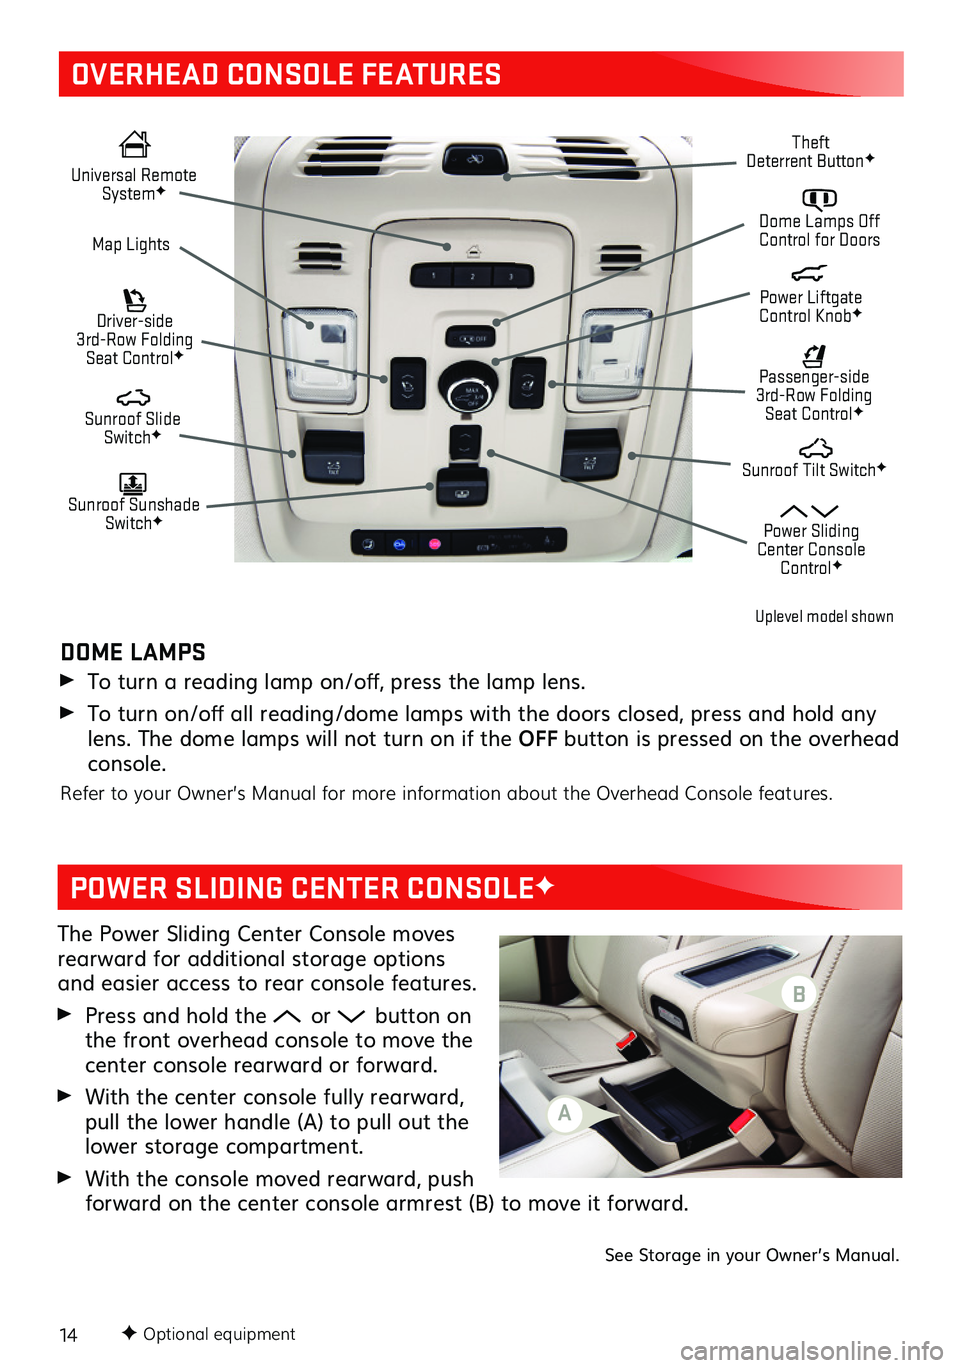 GMC YUKON 2021  Get To Know Guide 14
OVERHEAD CONSOLE FEATURES
 Universal Remote SystemF Dome Lamps Off Control for DoorsMap Lights
 Sunroof Slide SwitchF
 Passenger-side 3rd-Row Folding Seat ControlF
 Sunroof Sunshade SwitchF
 Sunroo